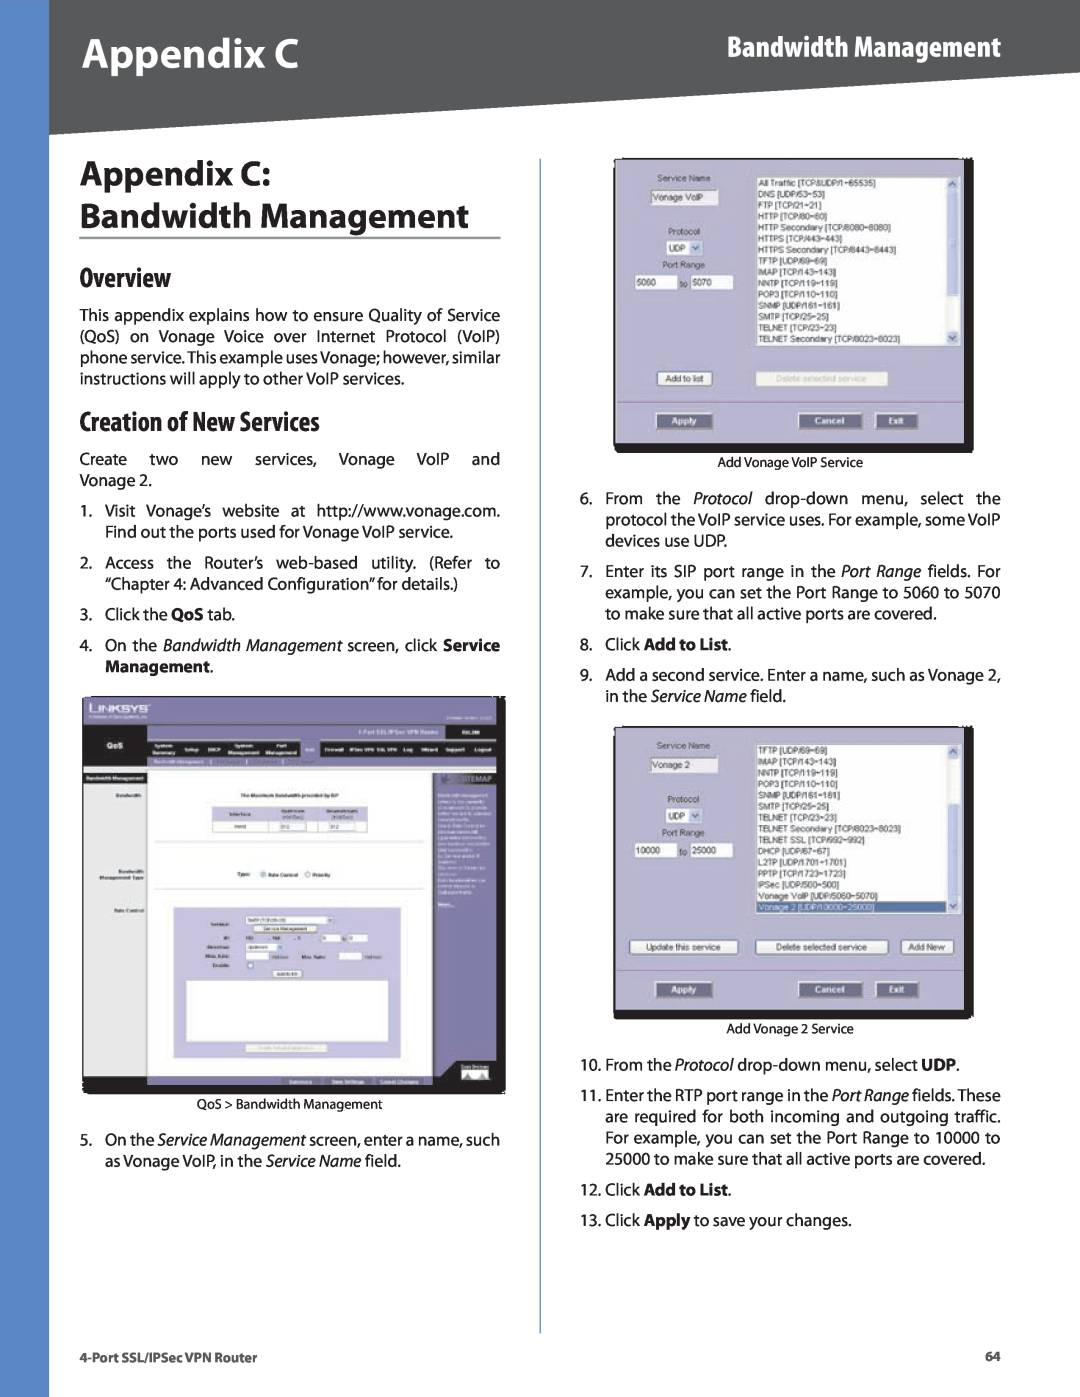 Cisco Systems RVL200 manual Appendix C Bandwidth Management, Creation of New Services, Click Add to List, Overview 